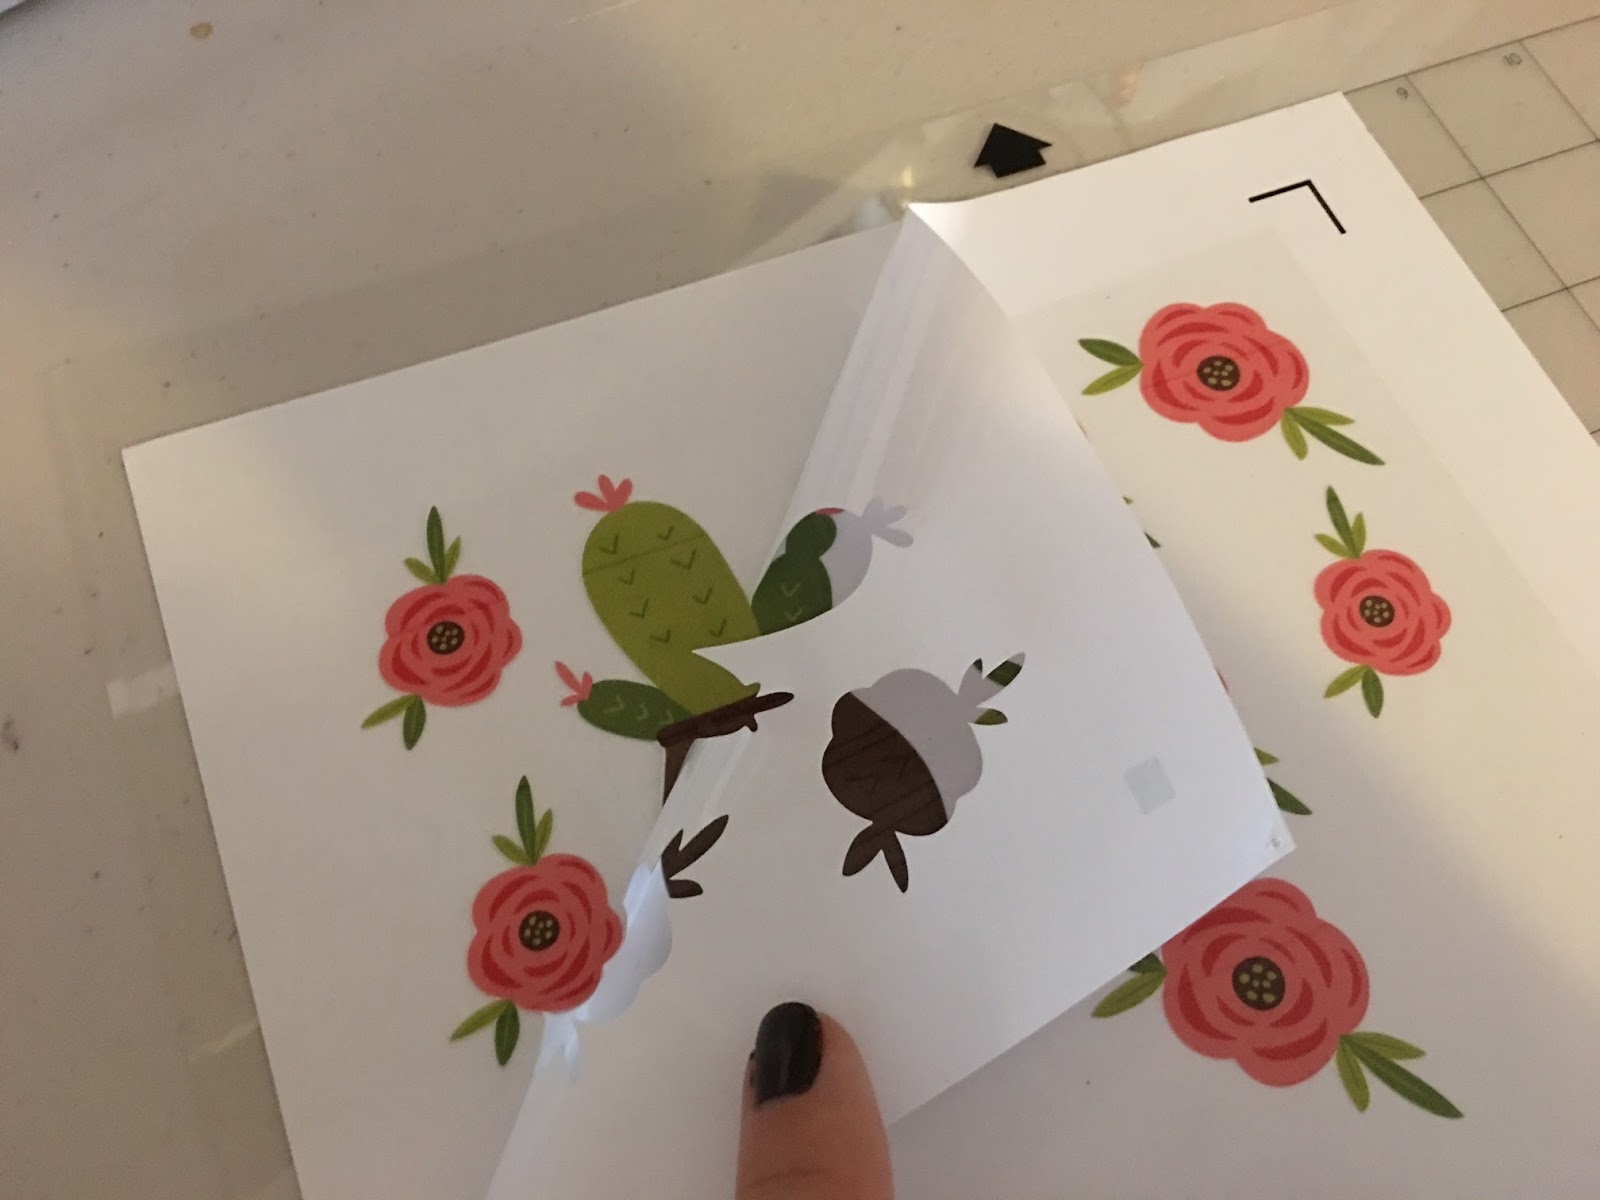 The Best Printable Vinyl Yet for Silhouette Print and Cut (Tutorial and